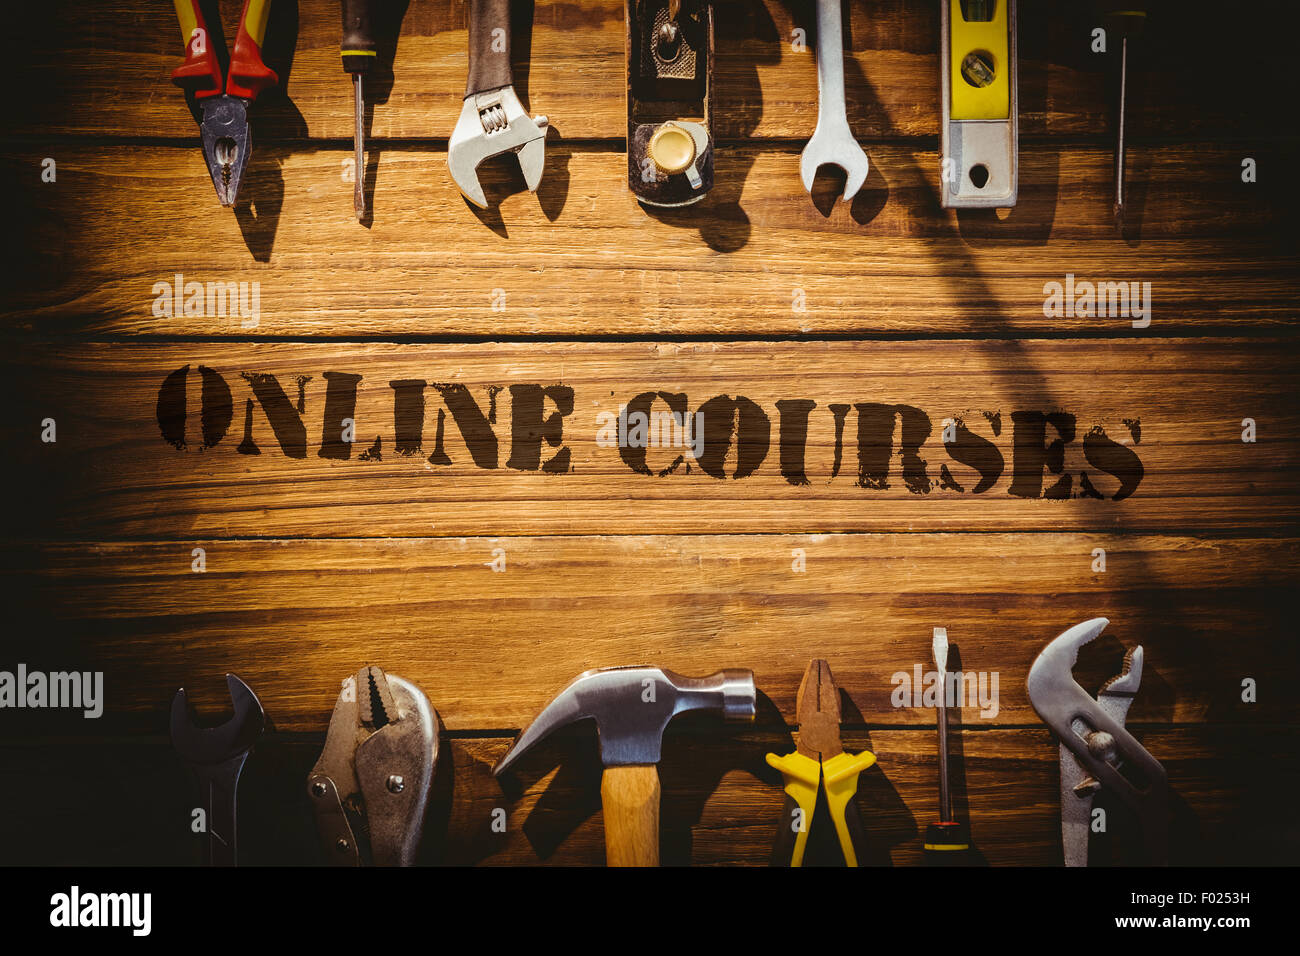 Online courses against desk with tools Stock Photo